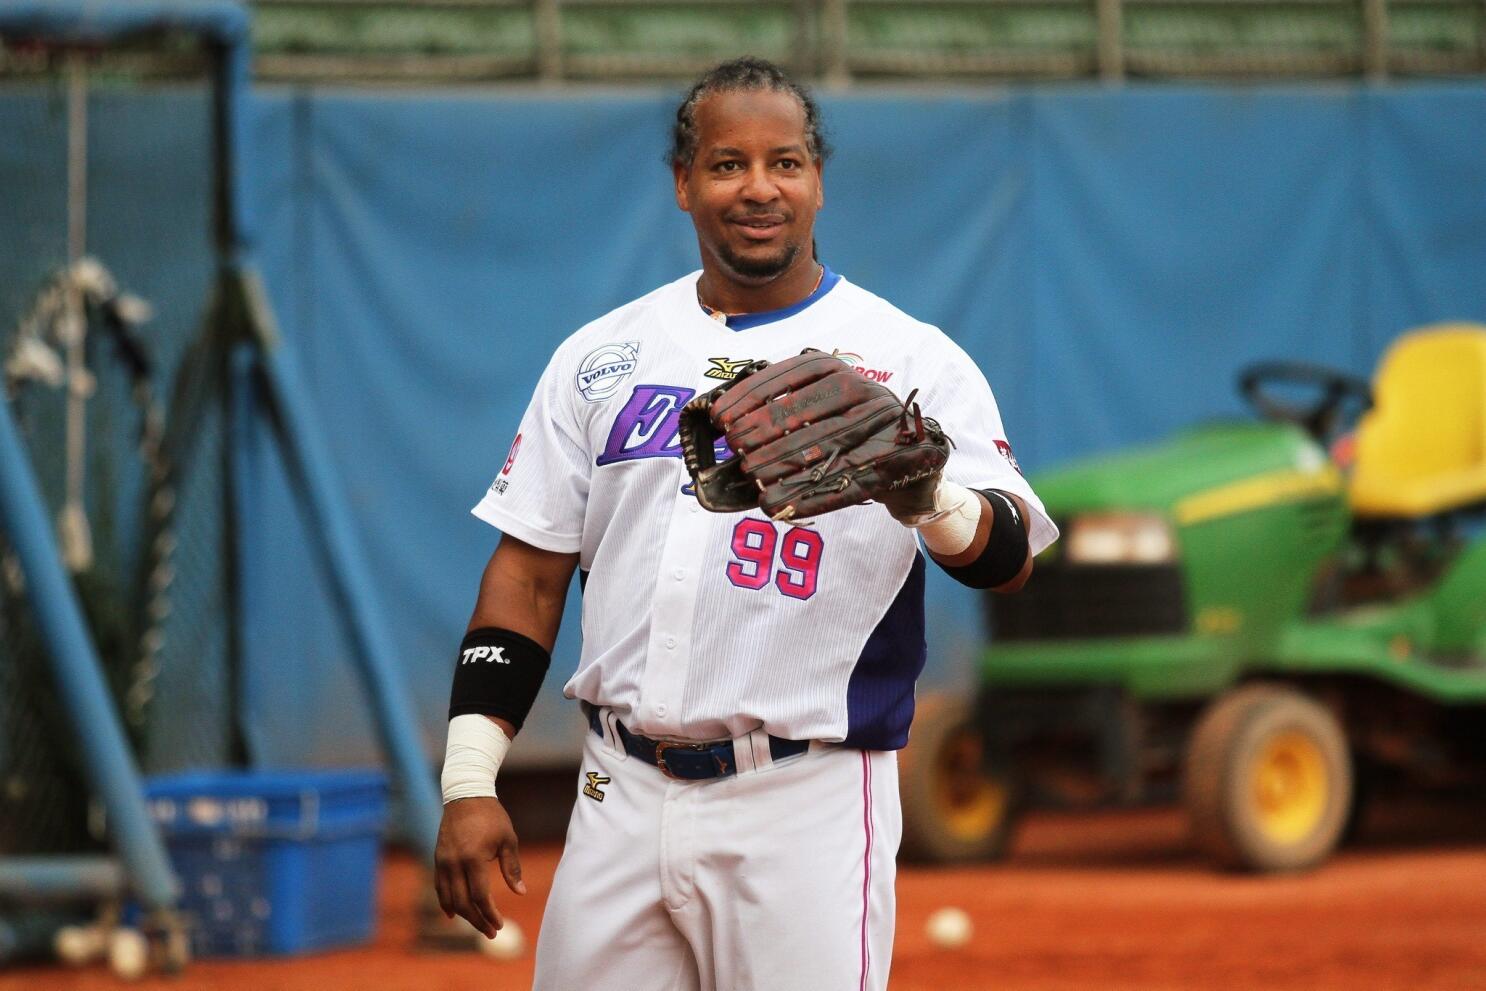 Off Base looks forward to a time when Manny Ramirez makes the Hall